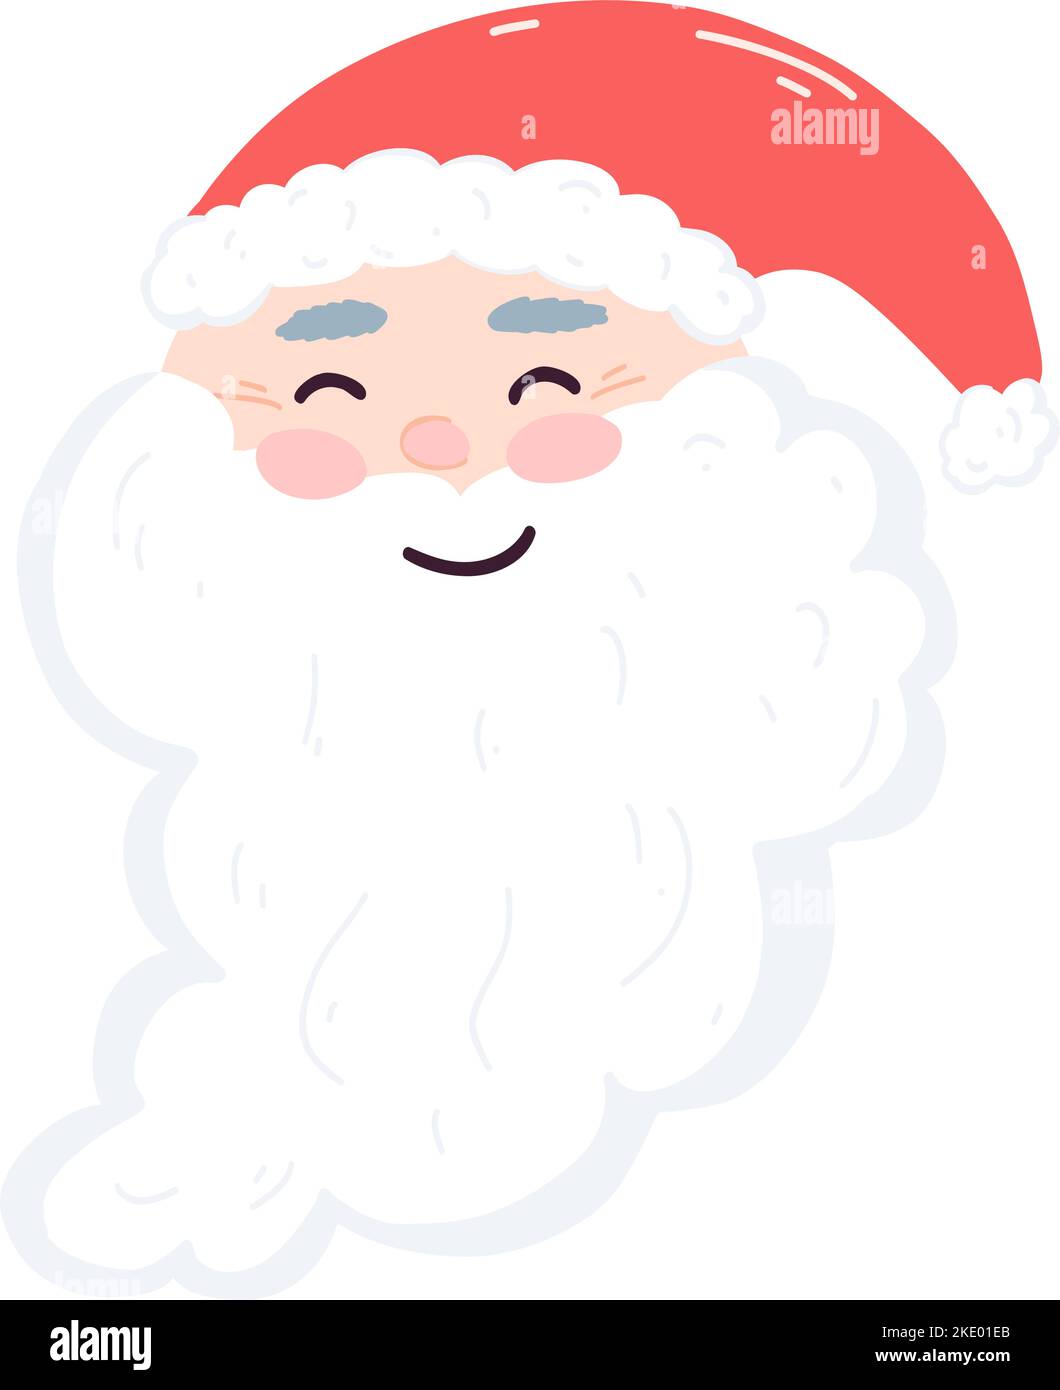 Cute Santa Claus head in cartoon flat style. Hand drawn vector illustration of Christmas and New Year character Stock Vector